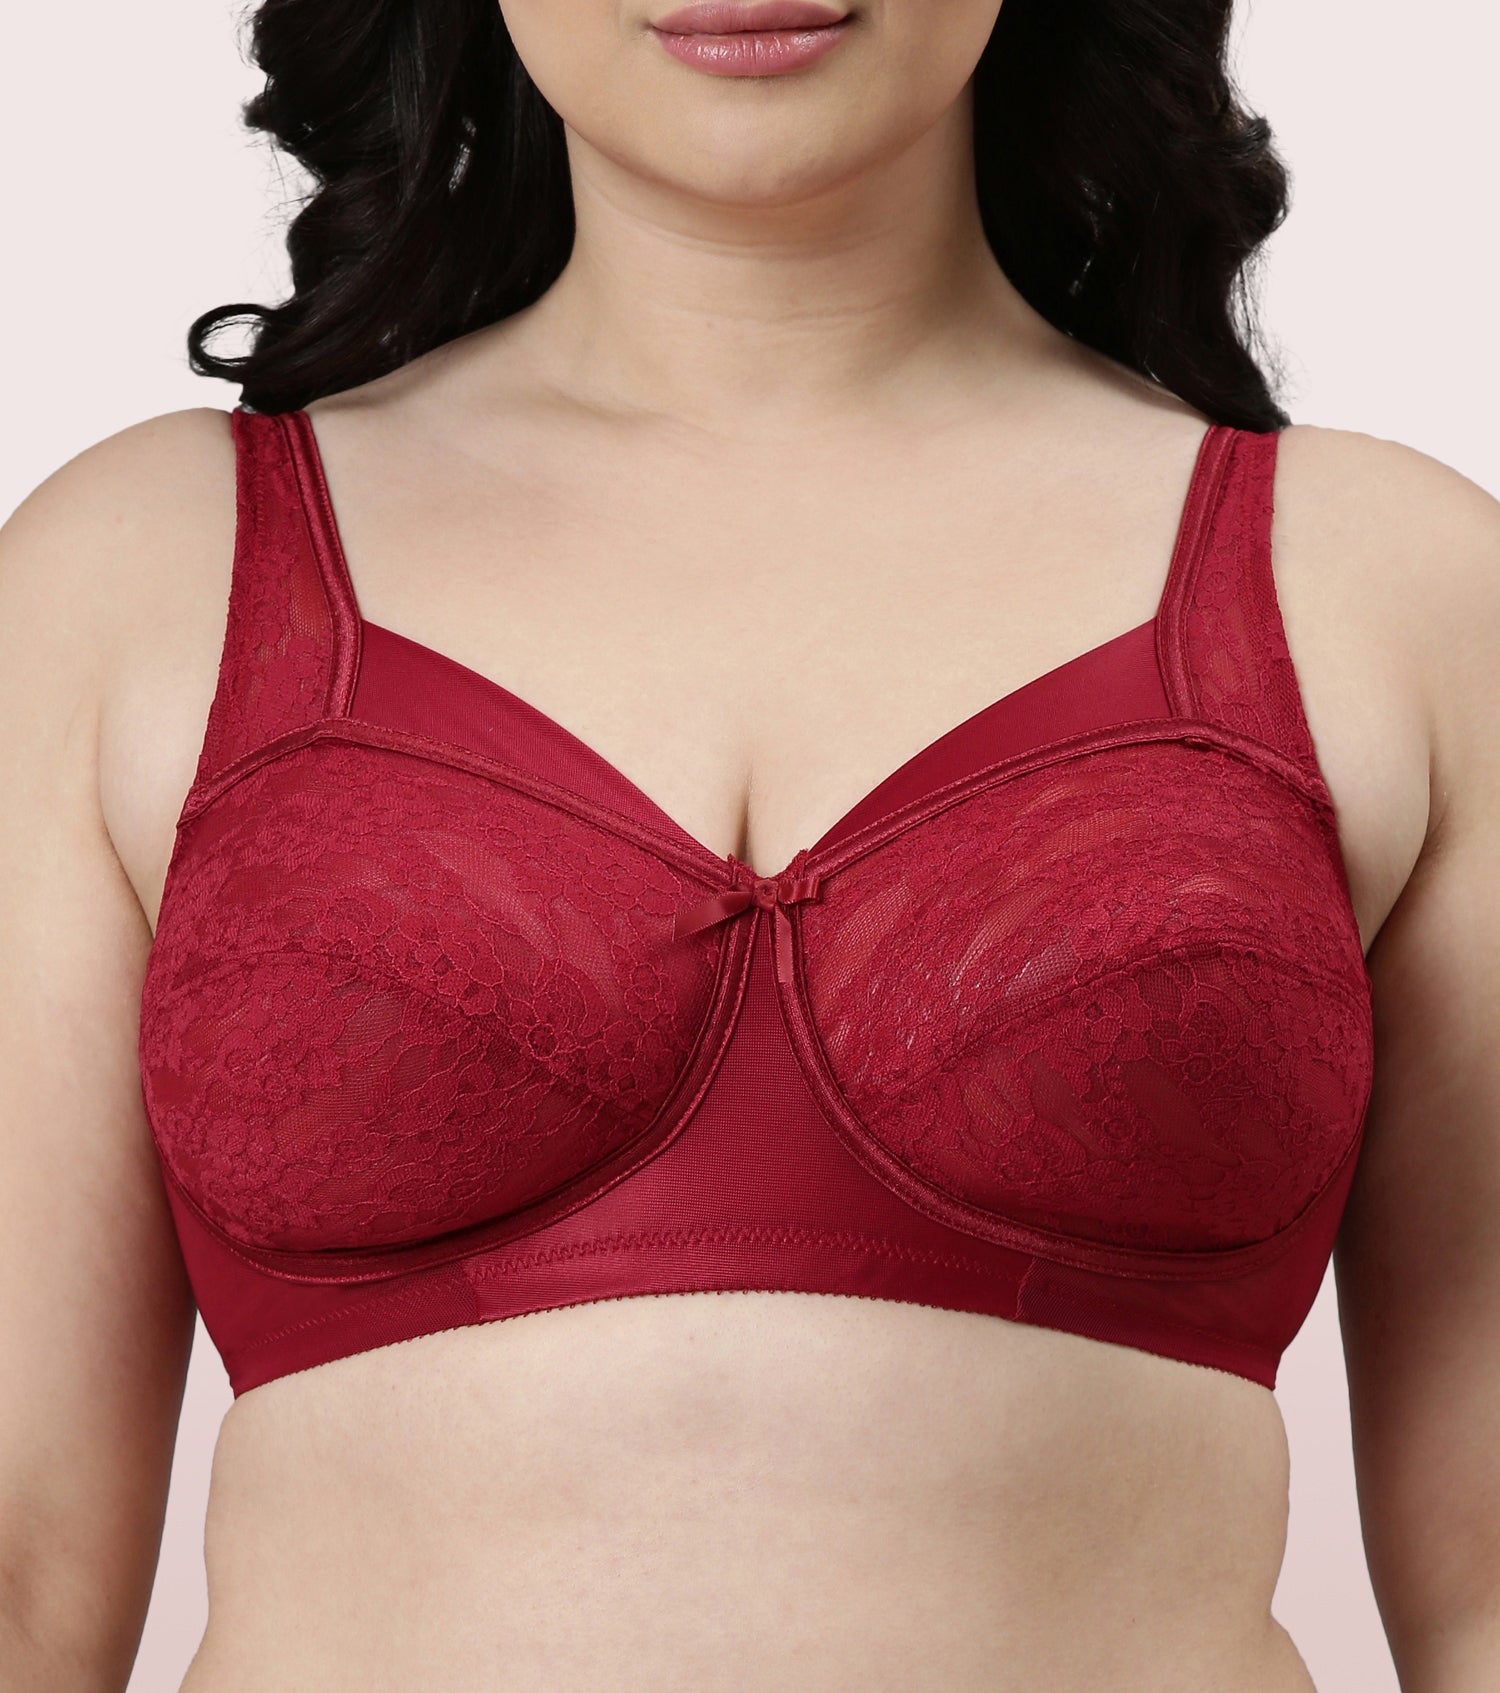 Enamor 36DD Size Bras in Bardhaman - Dealers, Manufacturers & Suppliers -  Justdial